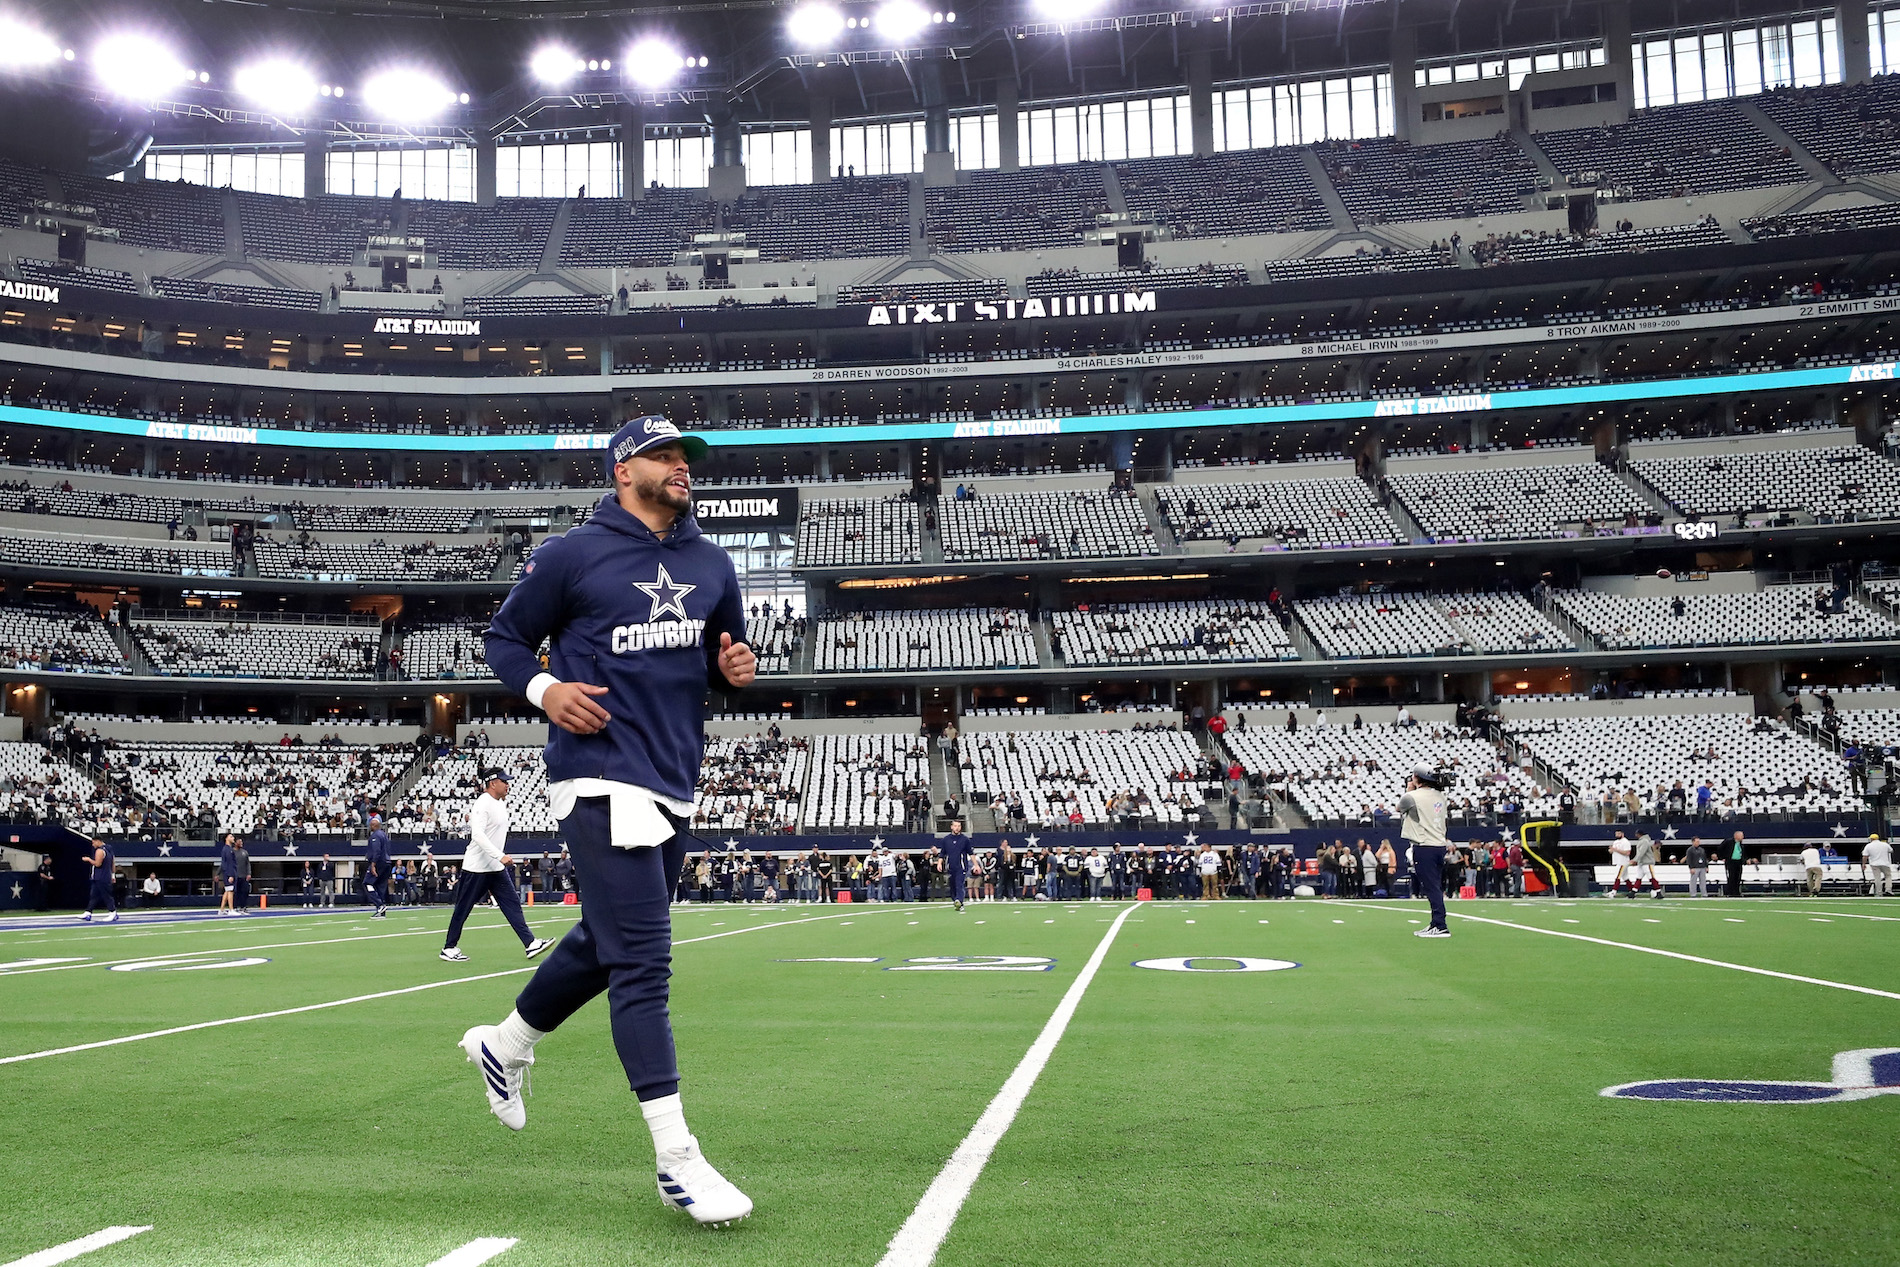 Dak Prescott and the Dallas Cowboys have until Wednesday to decide on a long-term contract, but the QB would be foolish to sign right now.